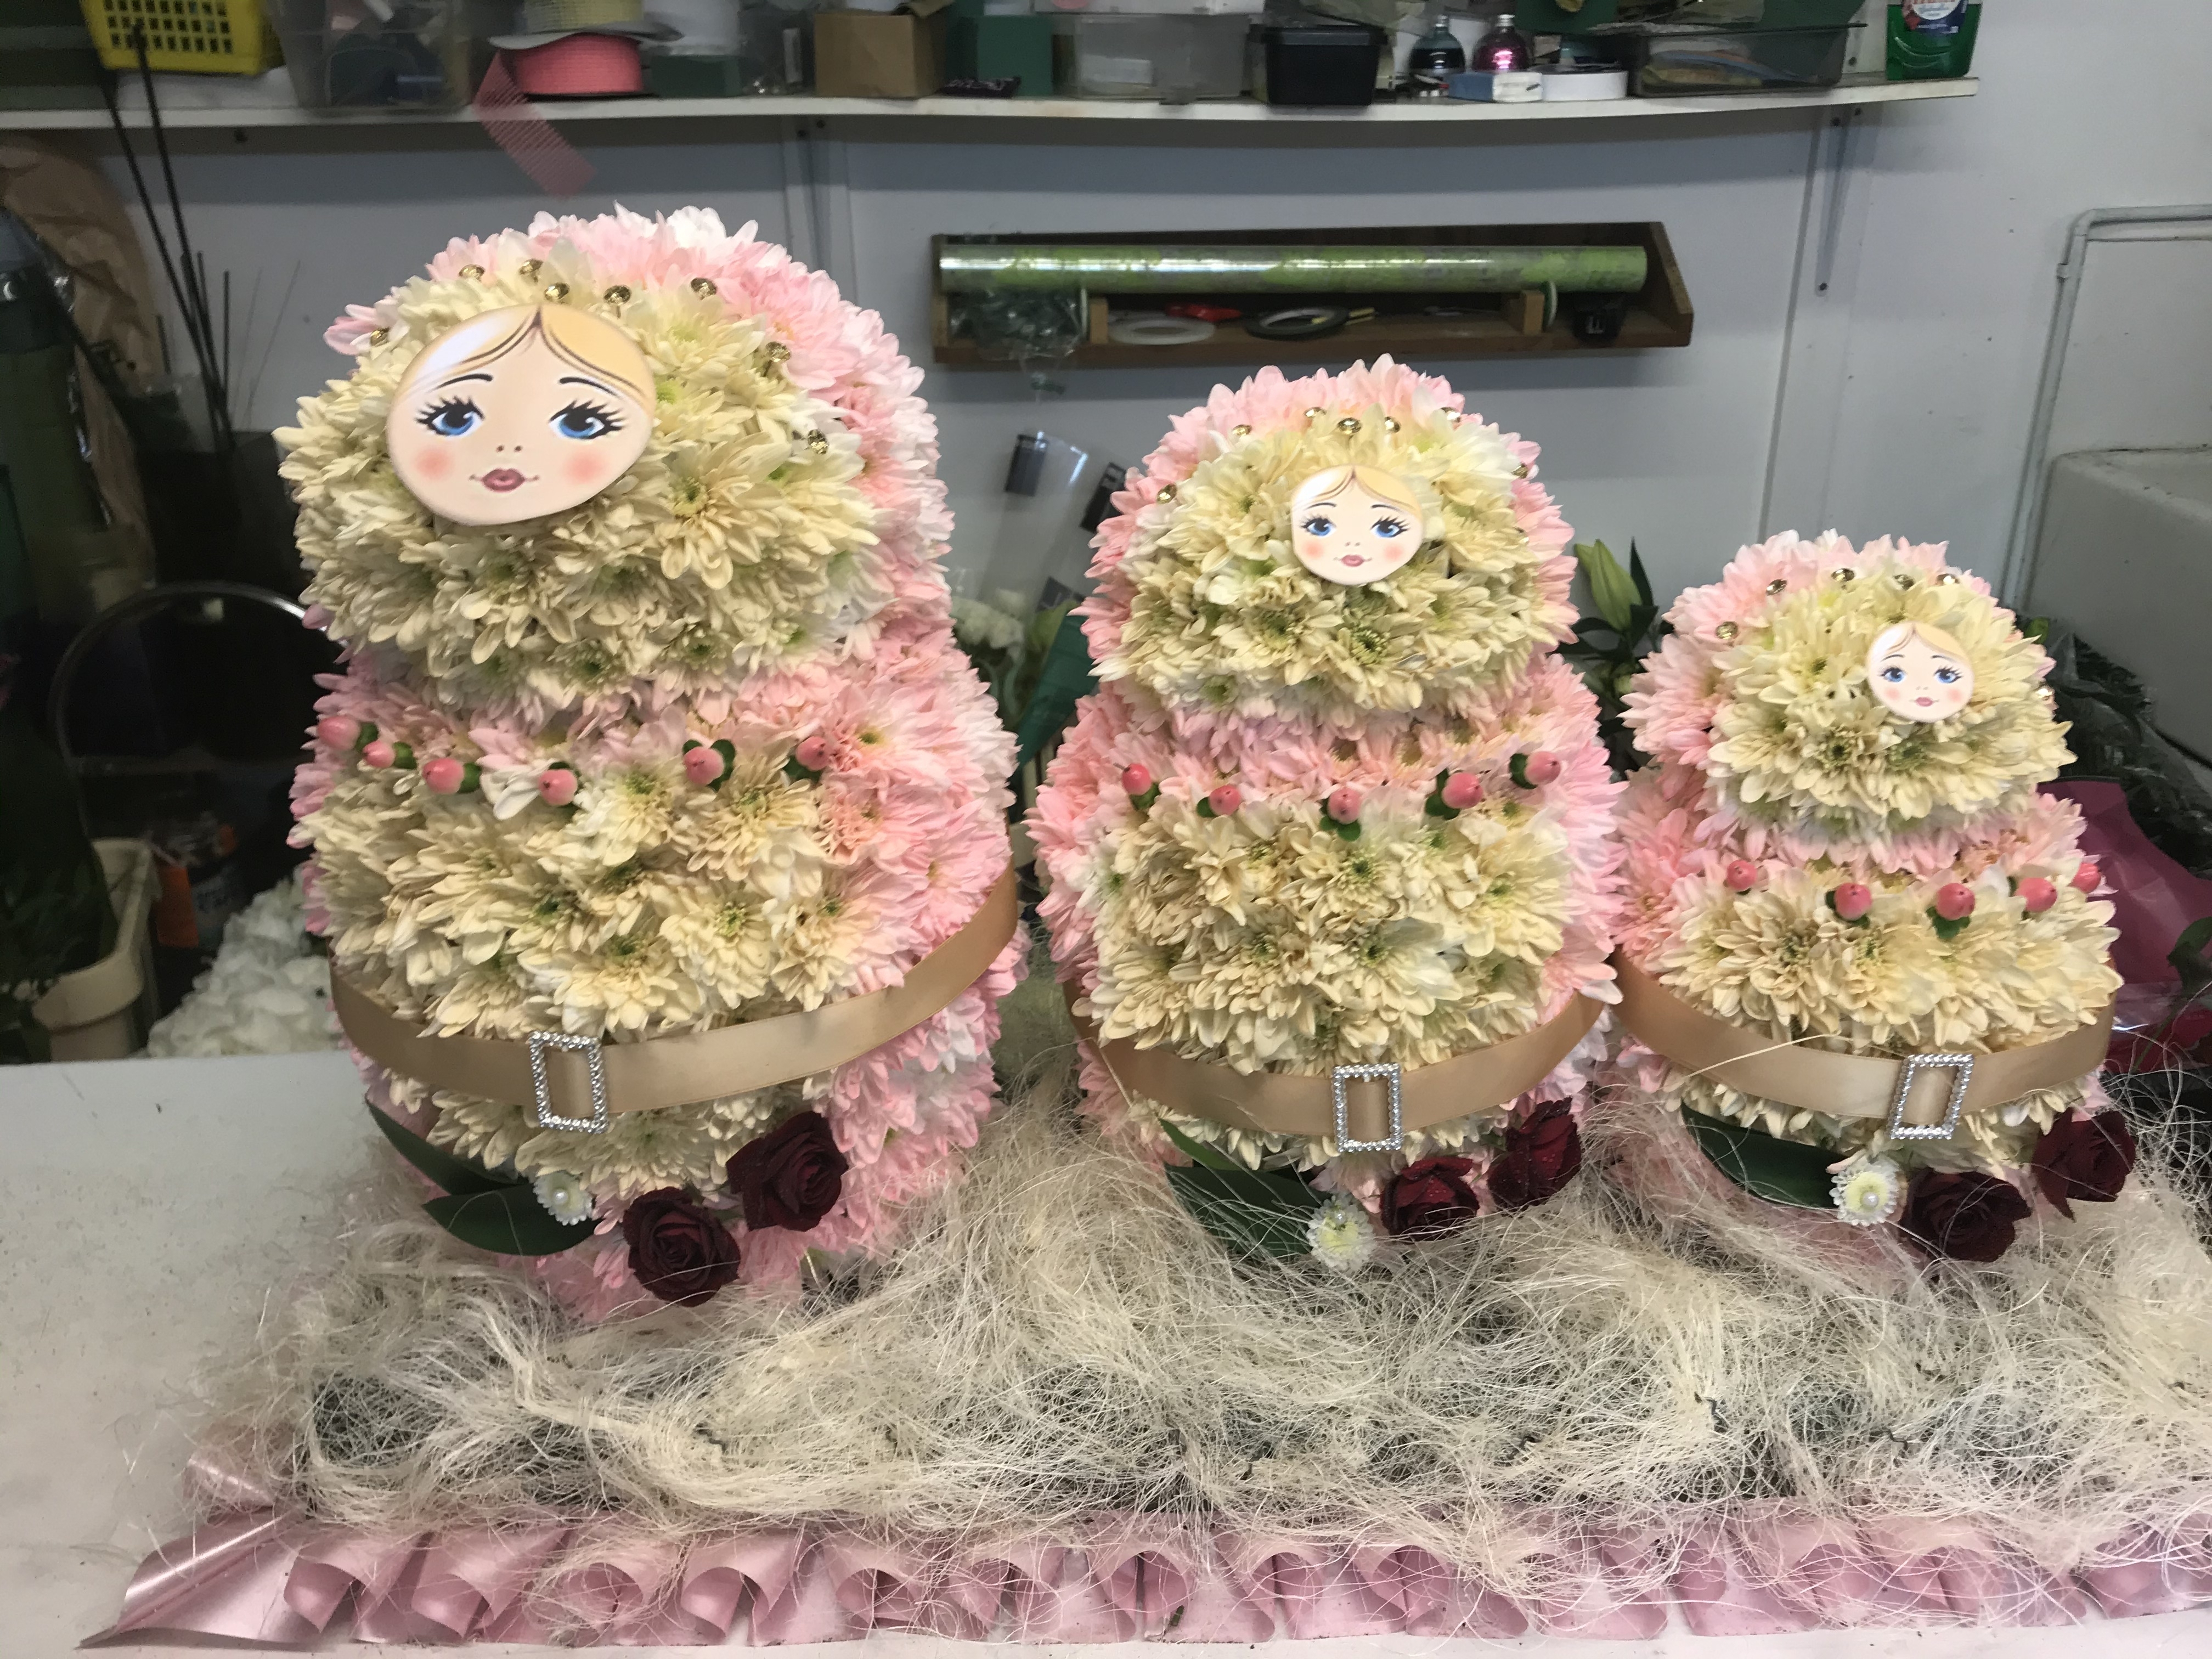 Russian Dolls made from flowers